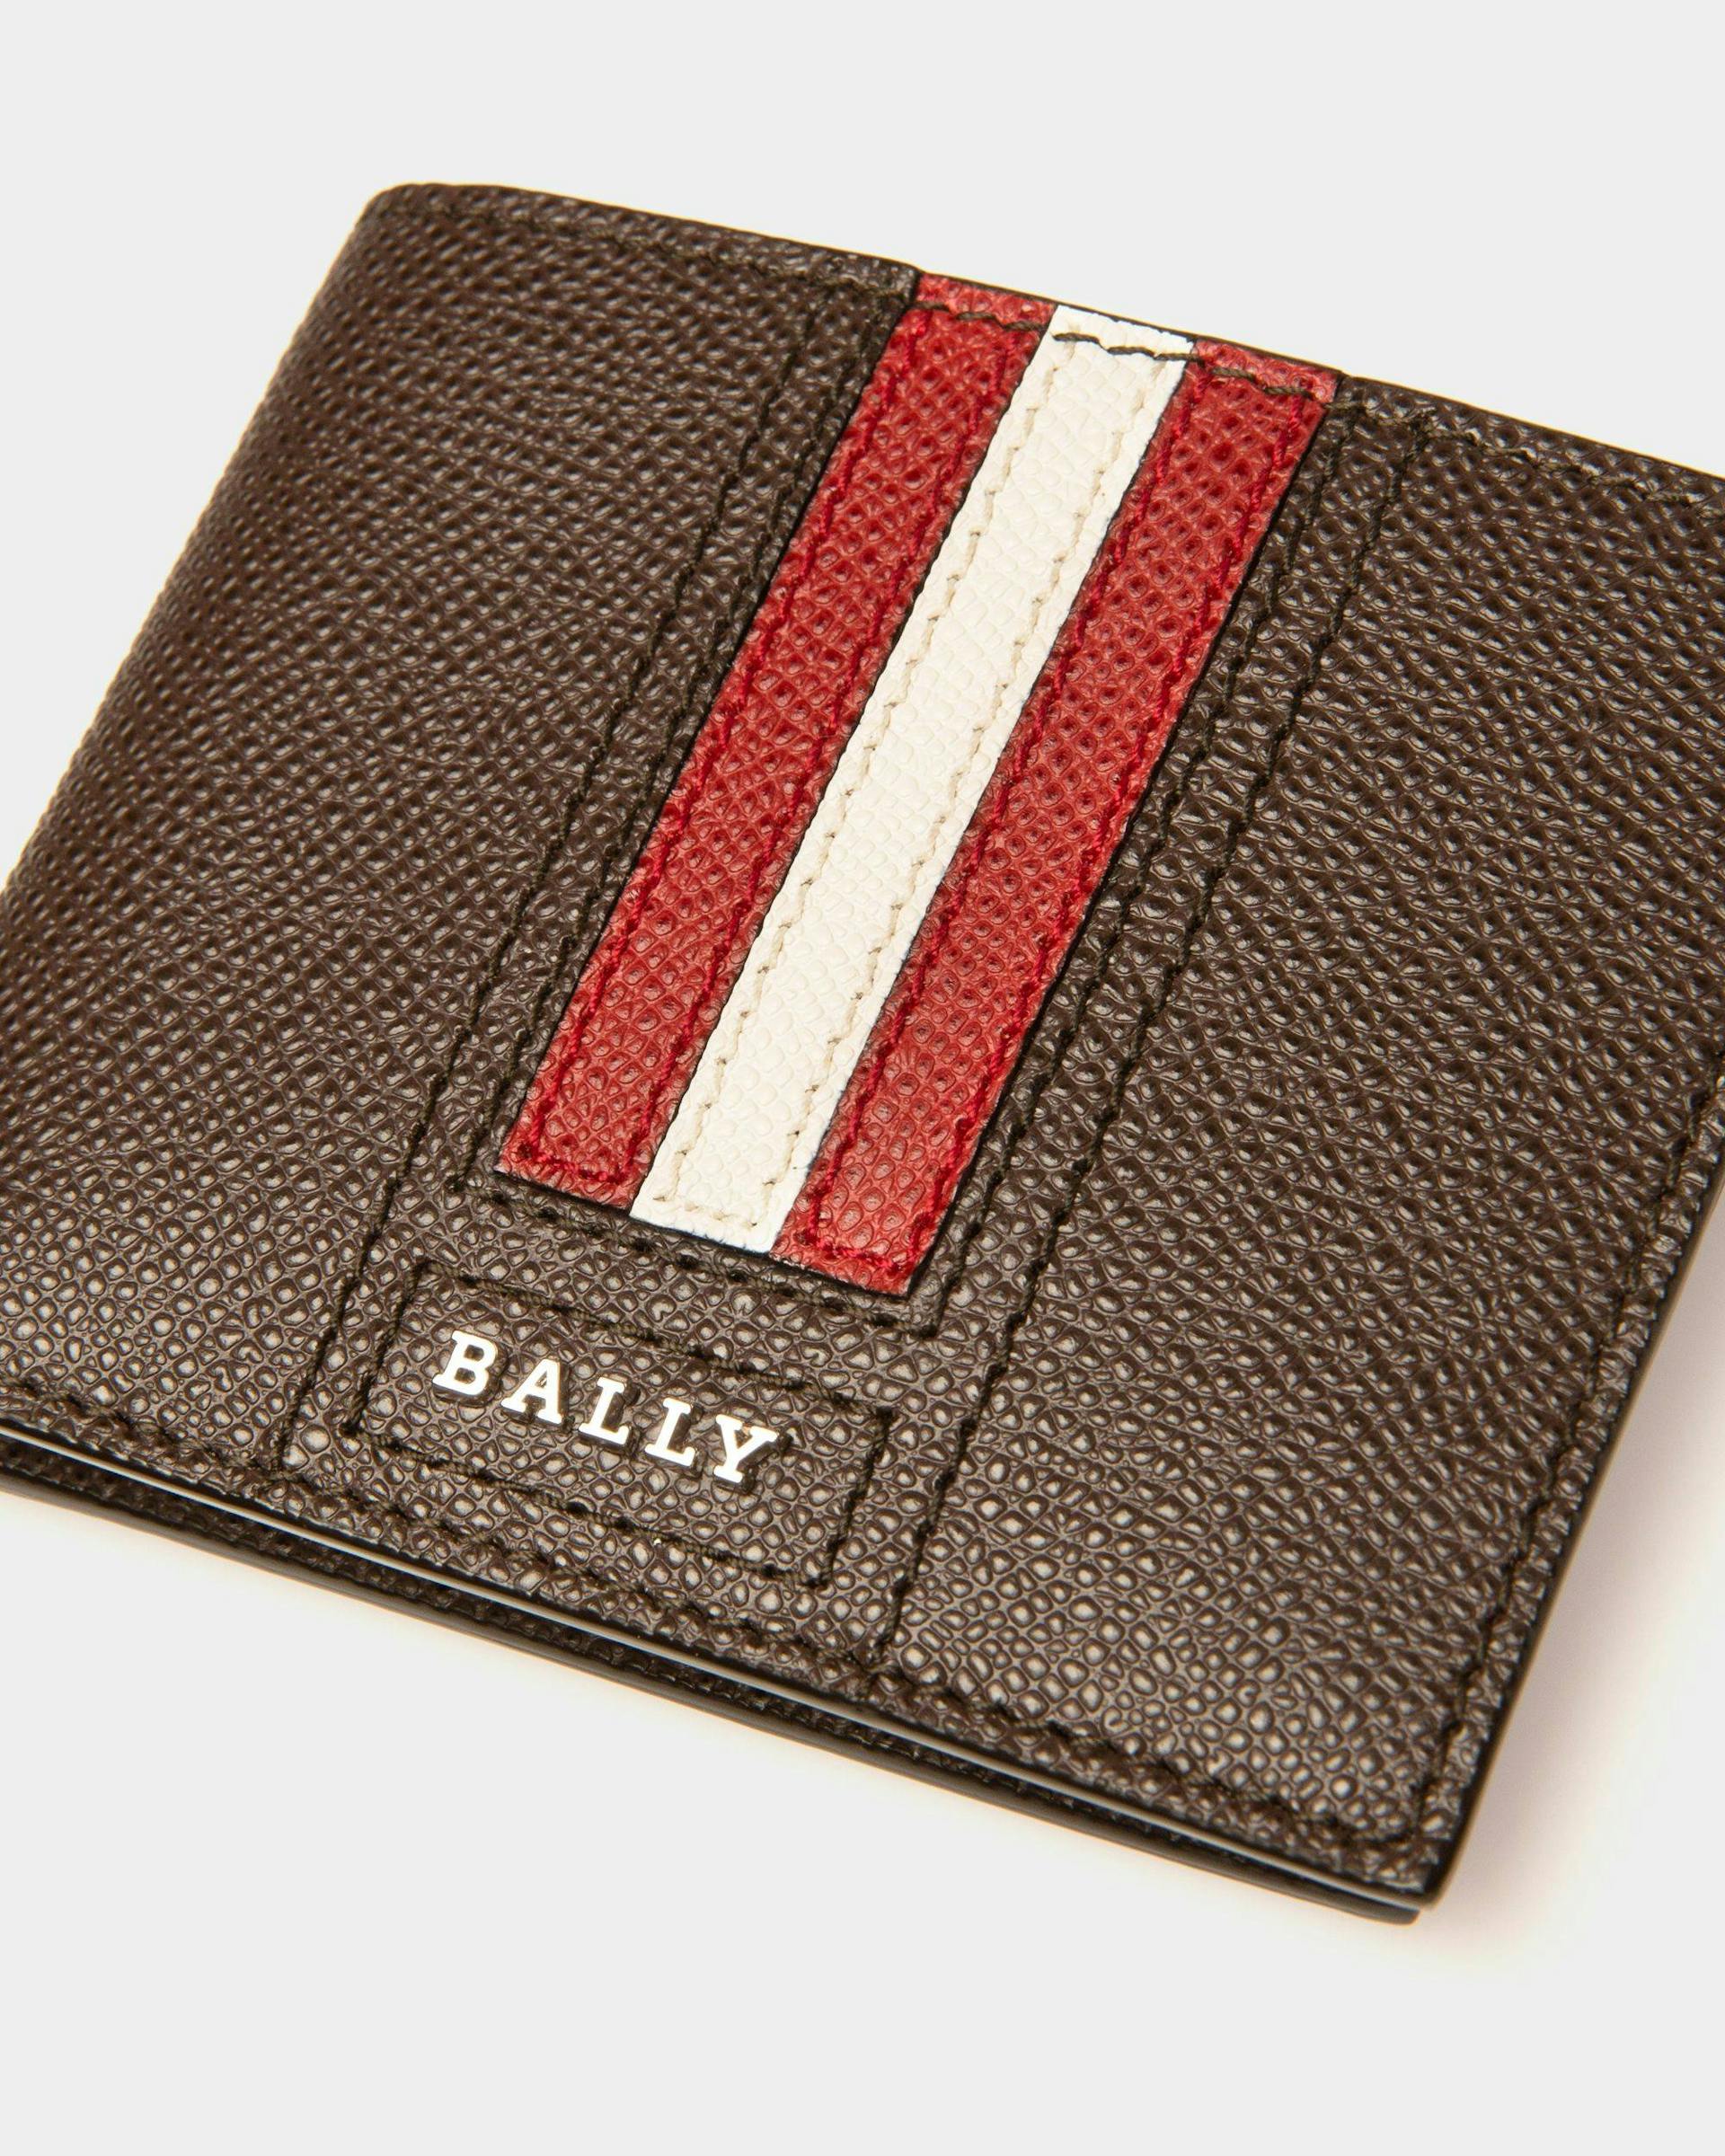 Tevye Leather Wallet In Brown - Homme - Bally - 04